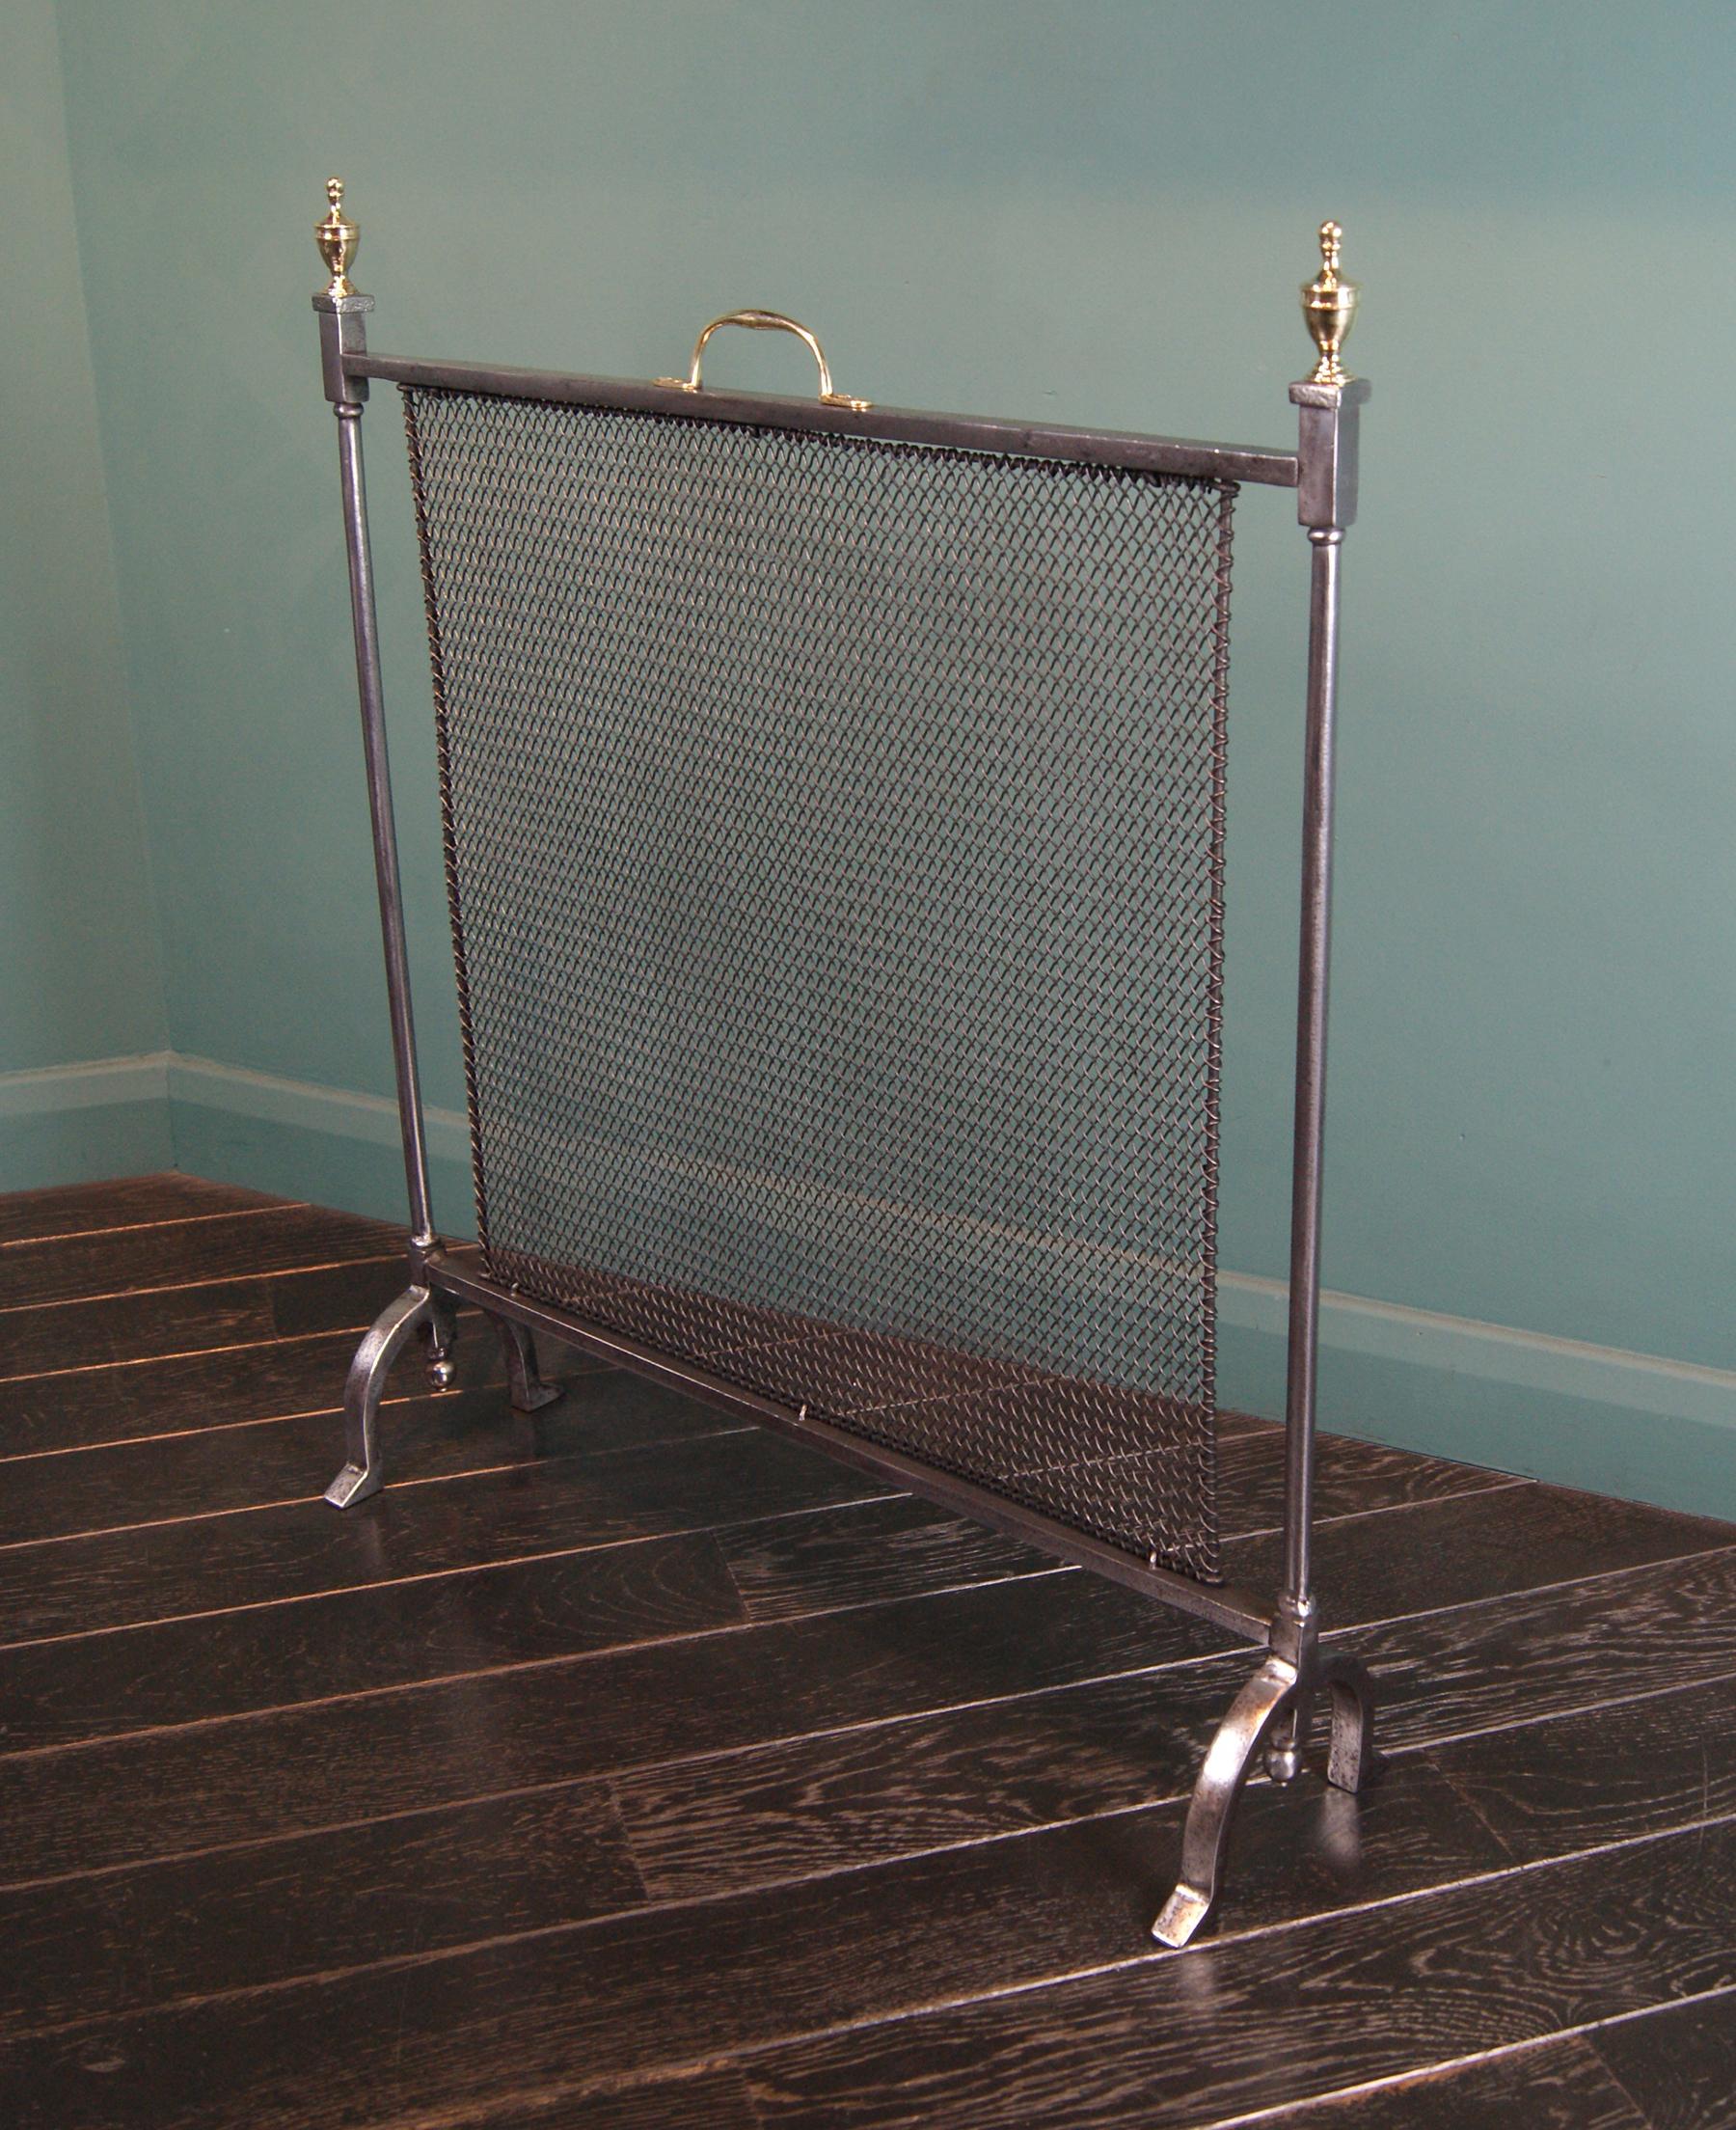 An elegant English polished steel fire screen. The steel frame with separate mesh panel on arched supports. Brass handle and urn finials uppermost.  Restored.

Circa 19th century

Vat to be added to the list price in the UK.